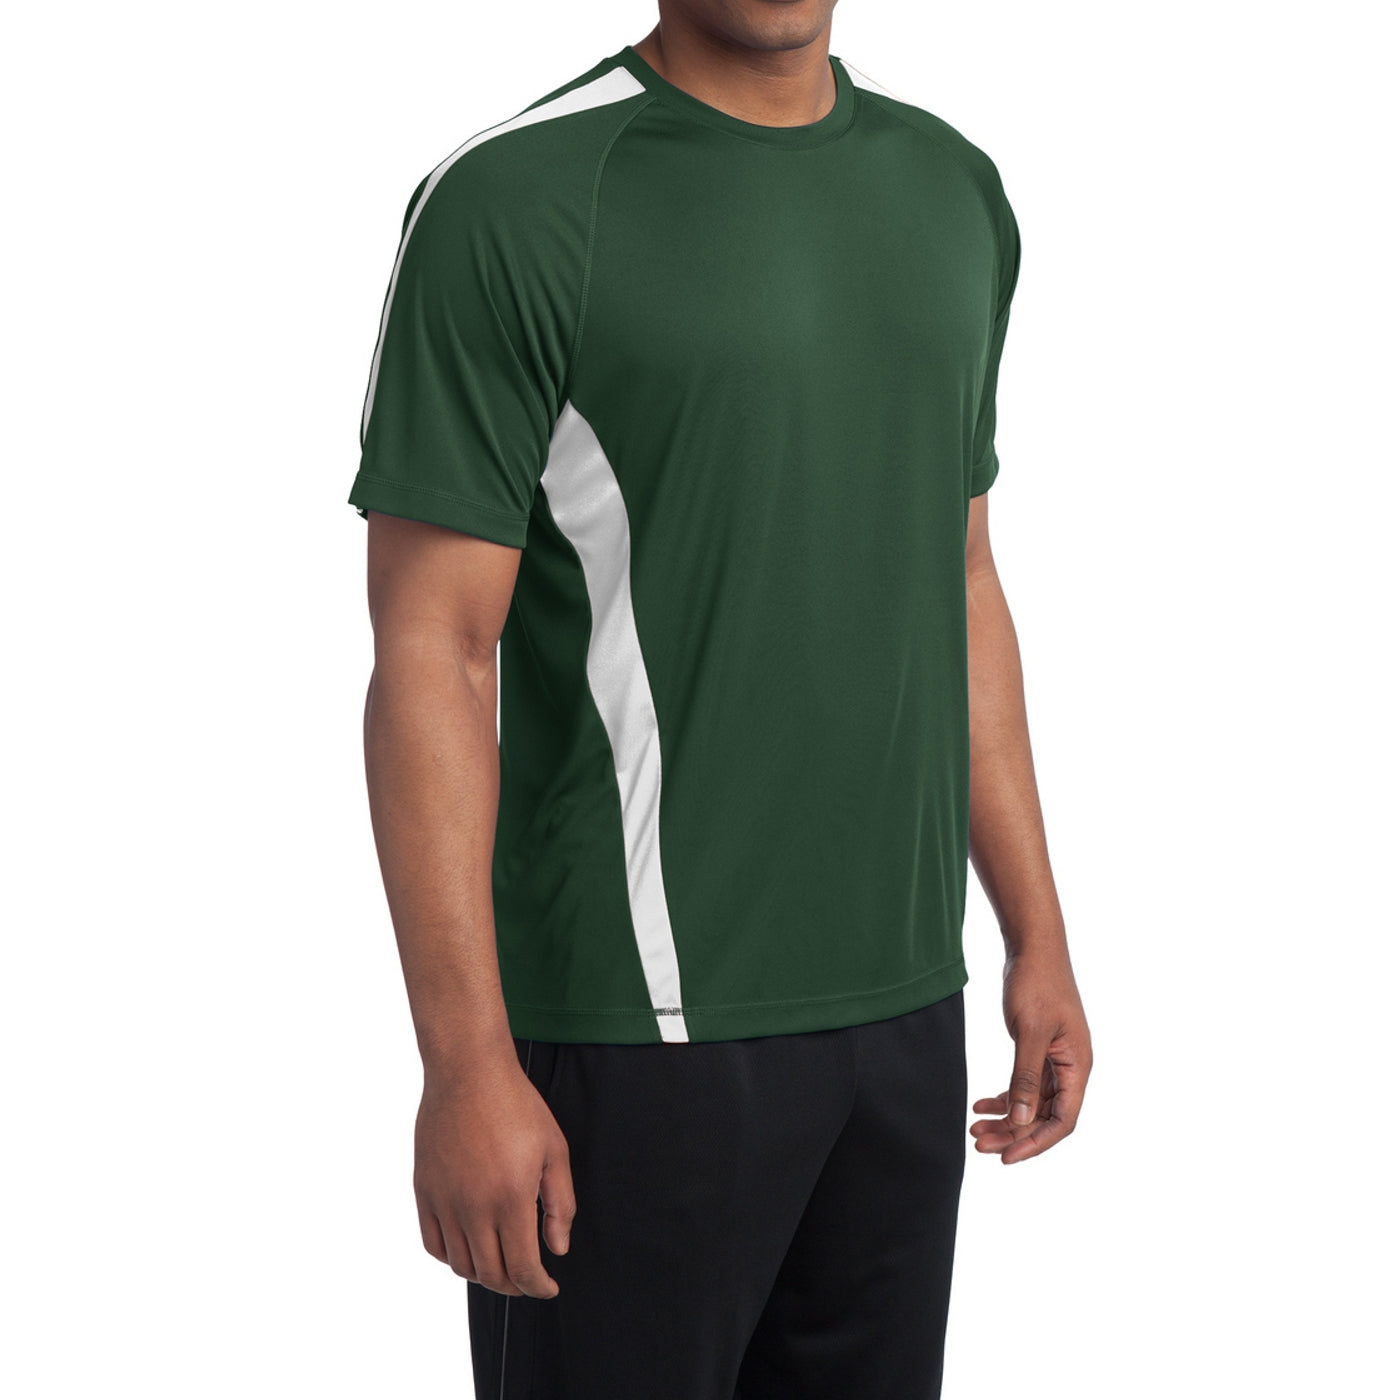 Men's Colorblock PosiCharge Competitor Tee - Forest Green/ White